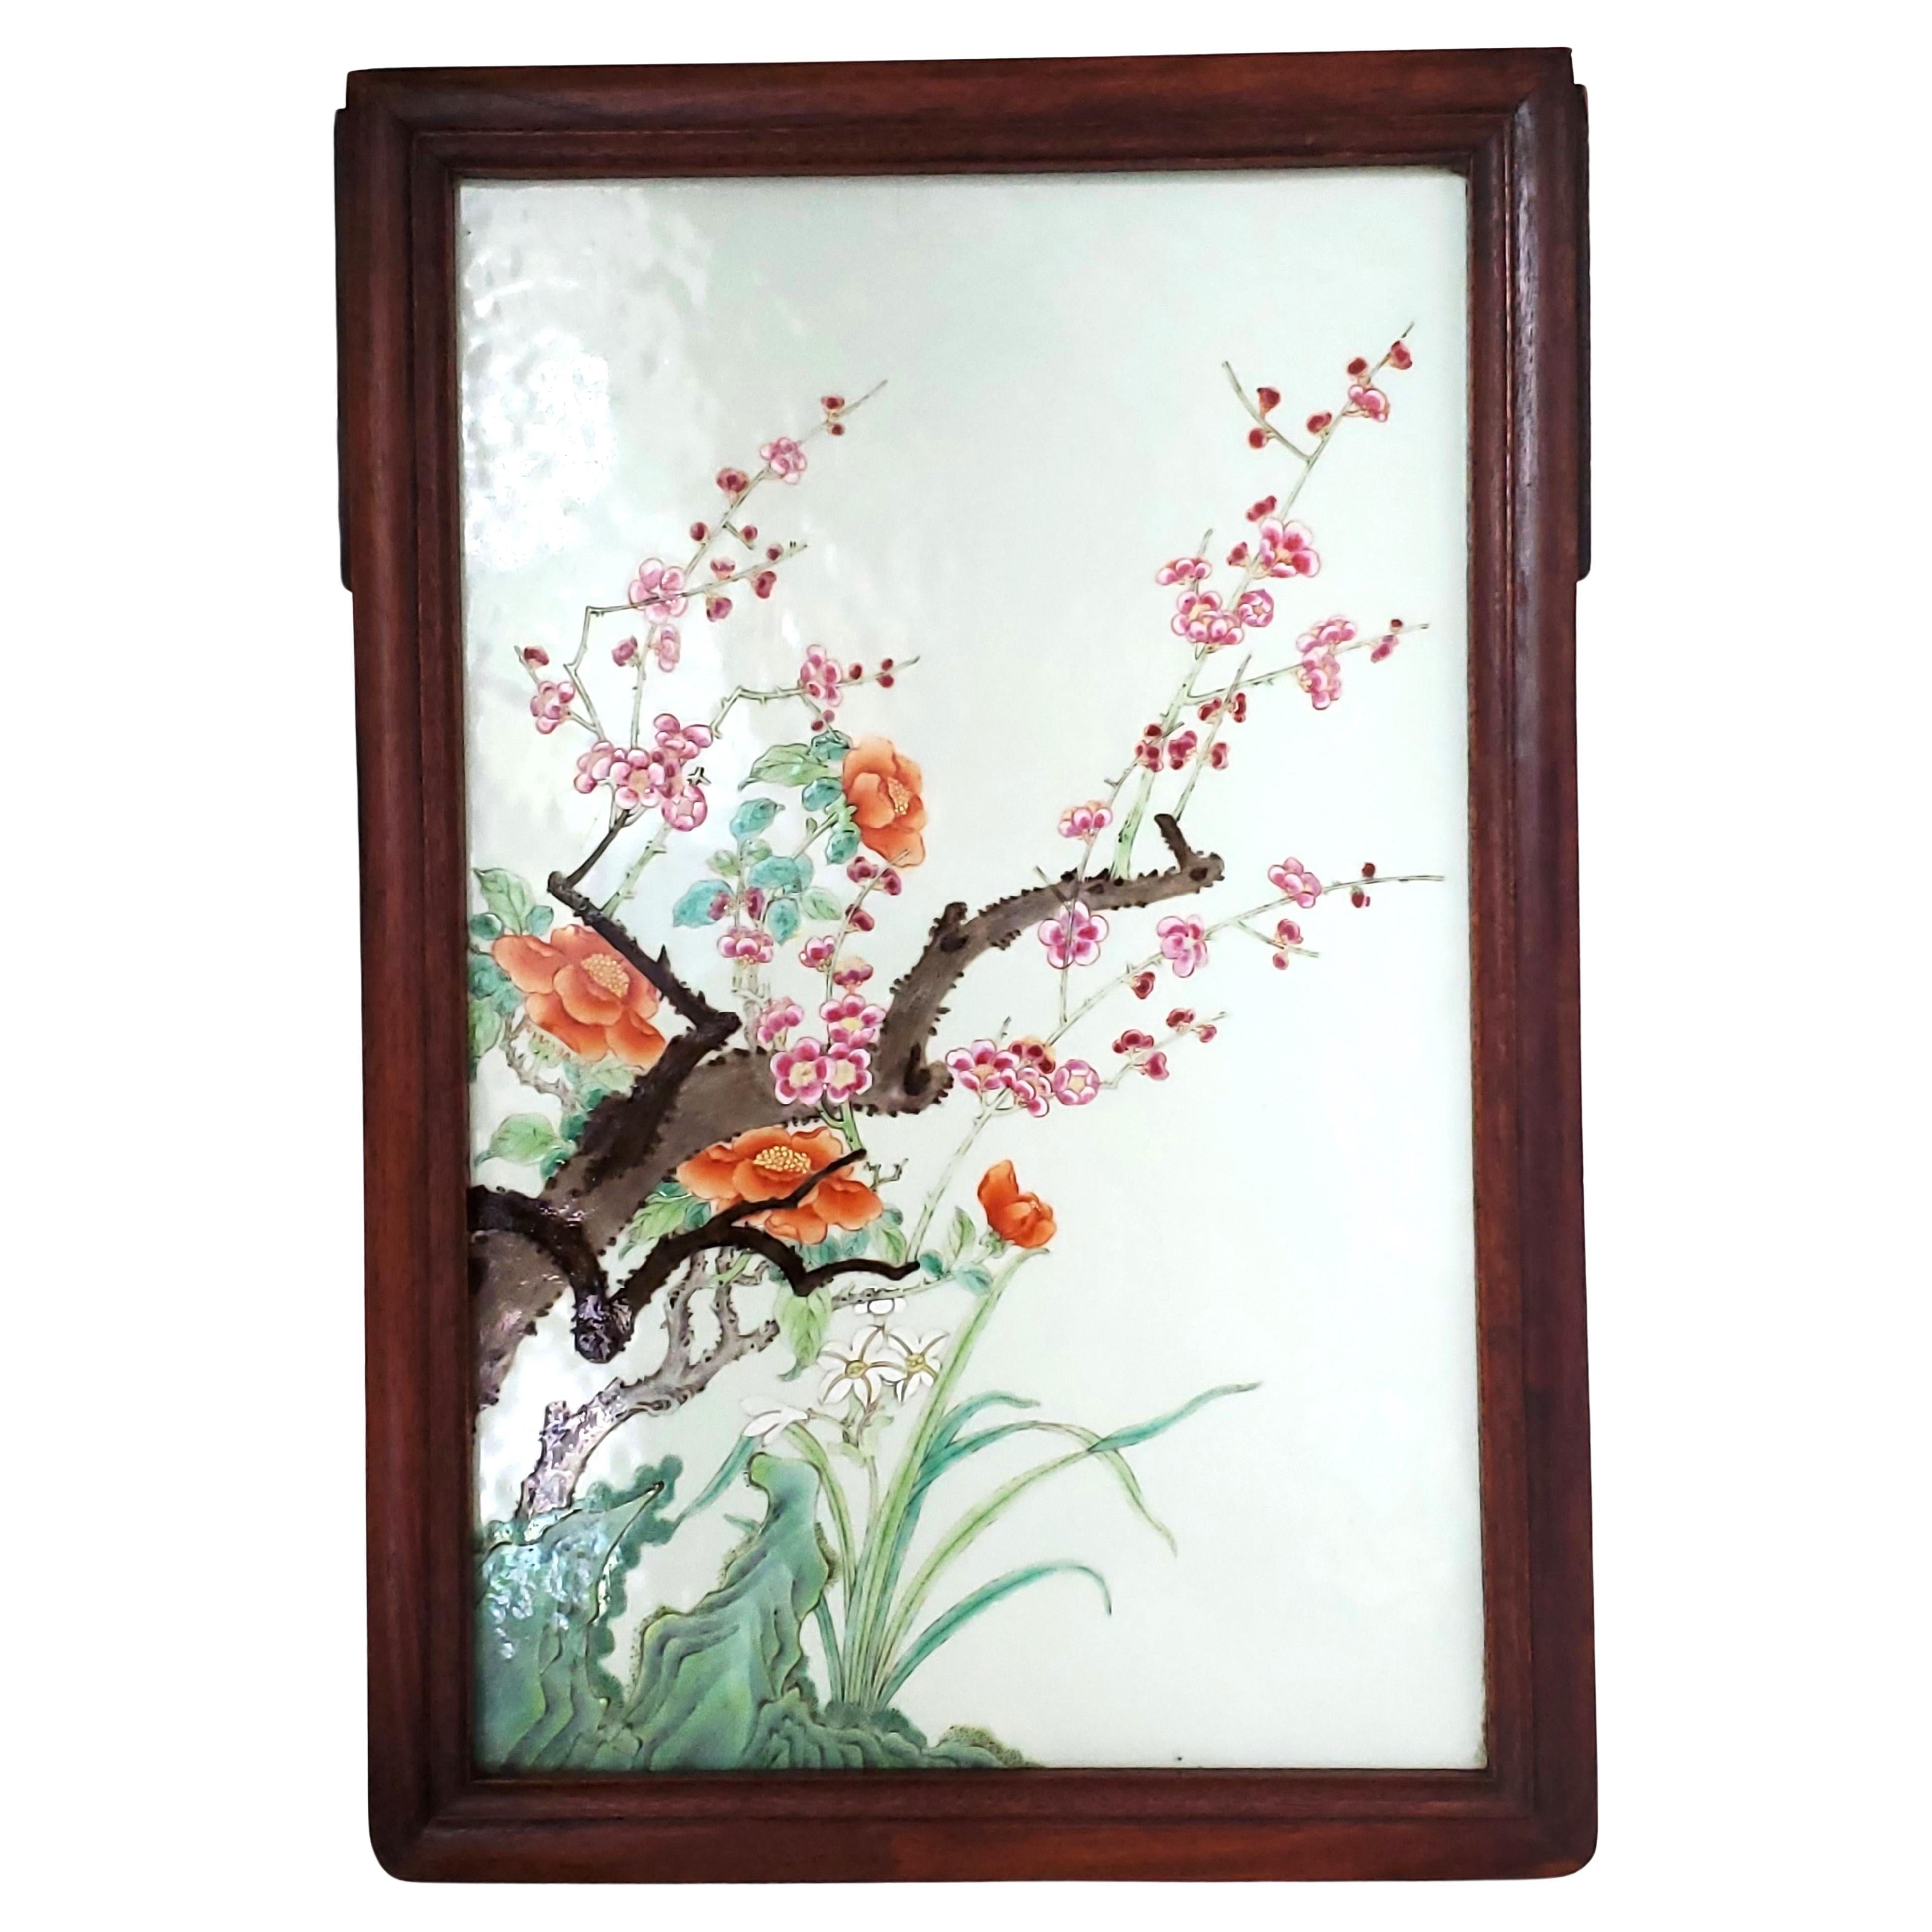 Antique Hand-Painted Porcelain Picture of Peonies, Fruit Blossoms, and Lilies For Sale